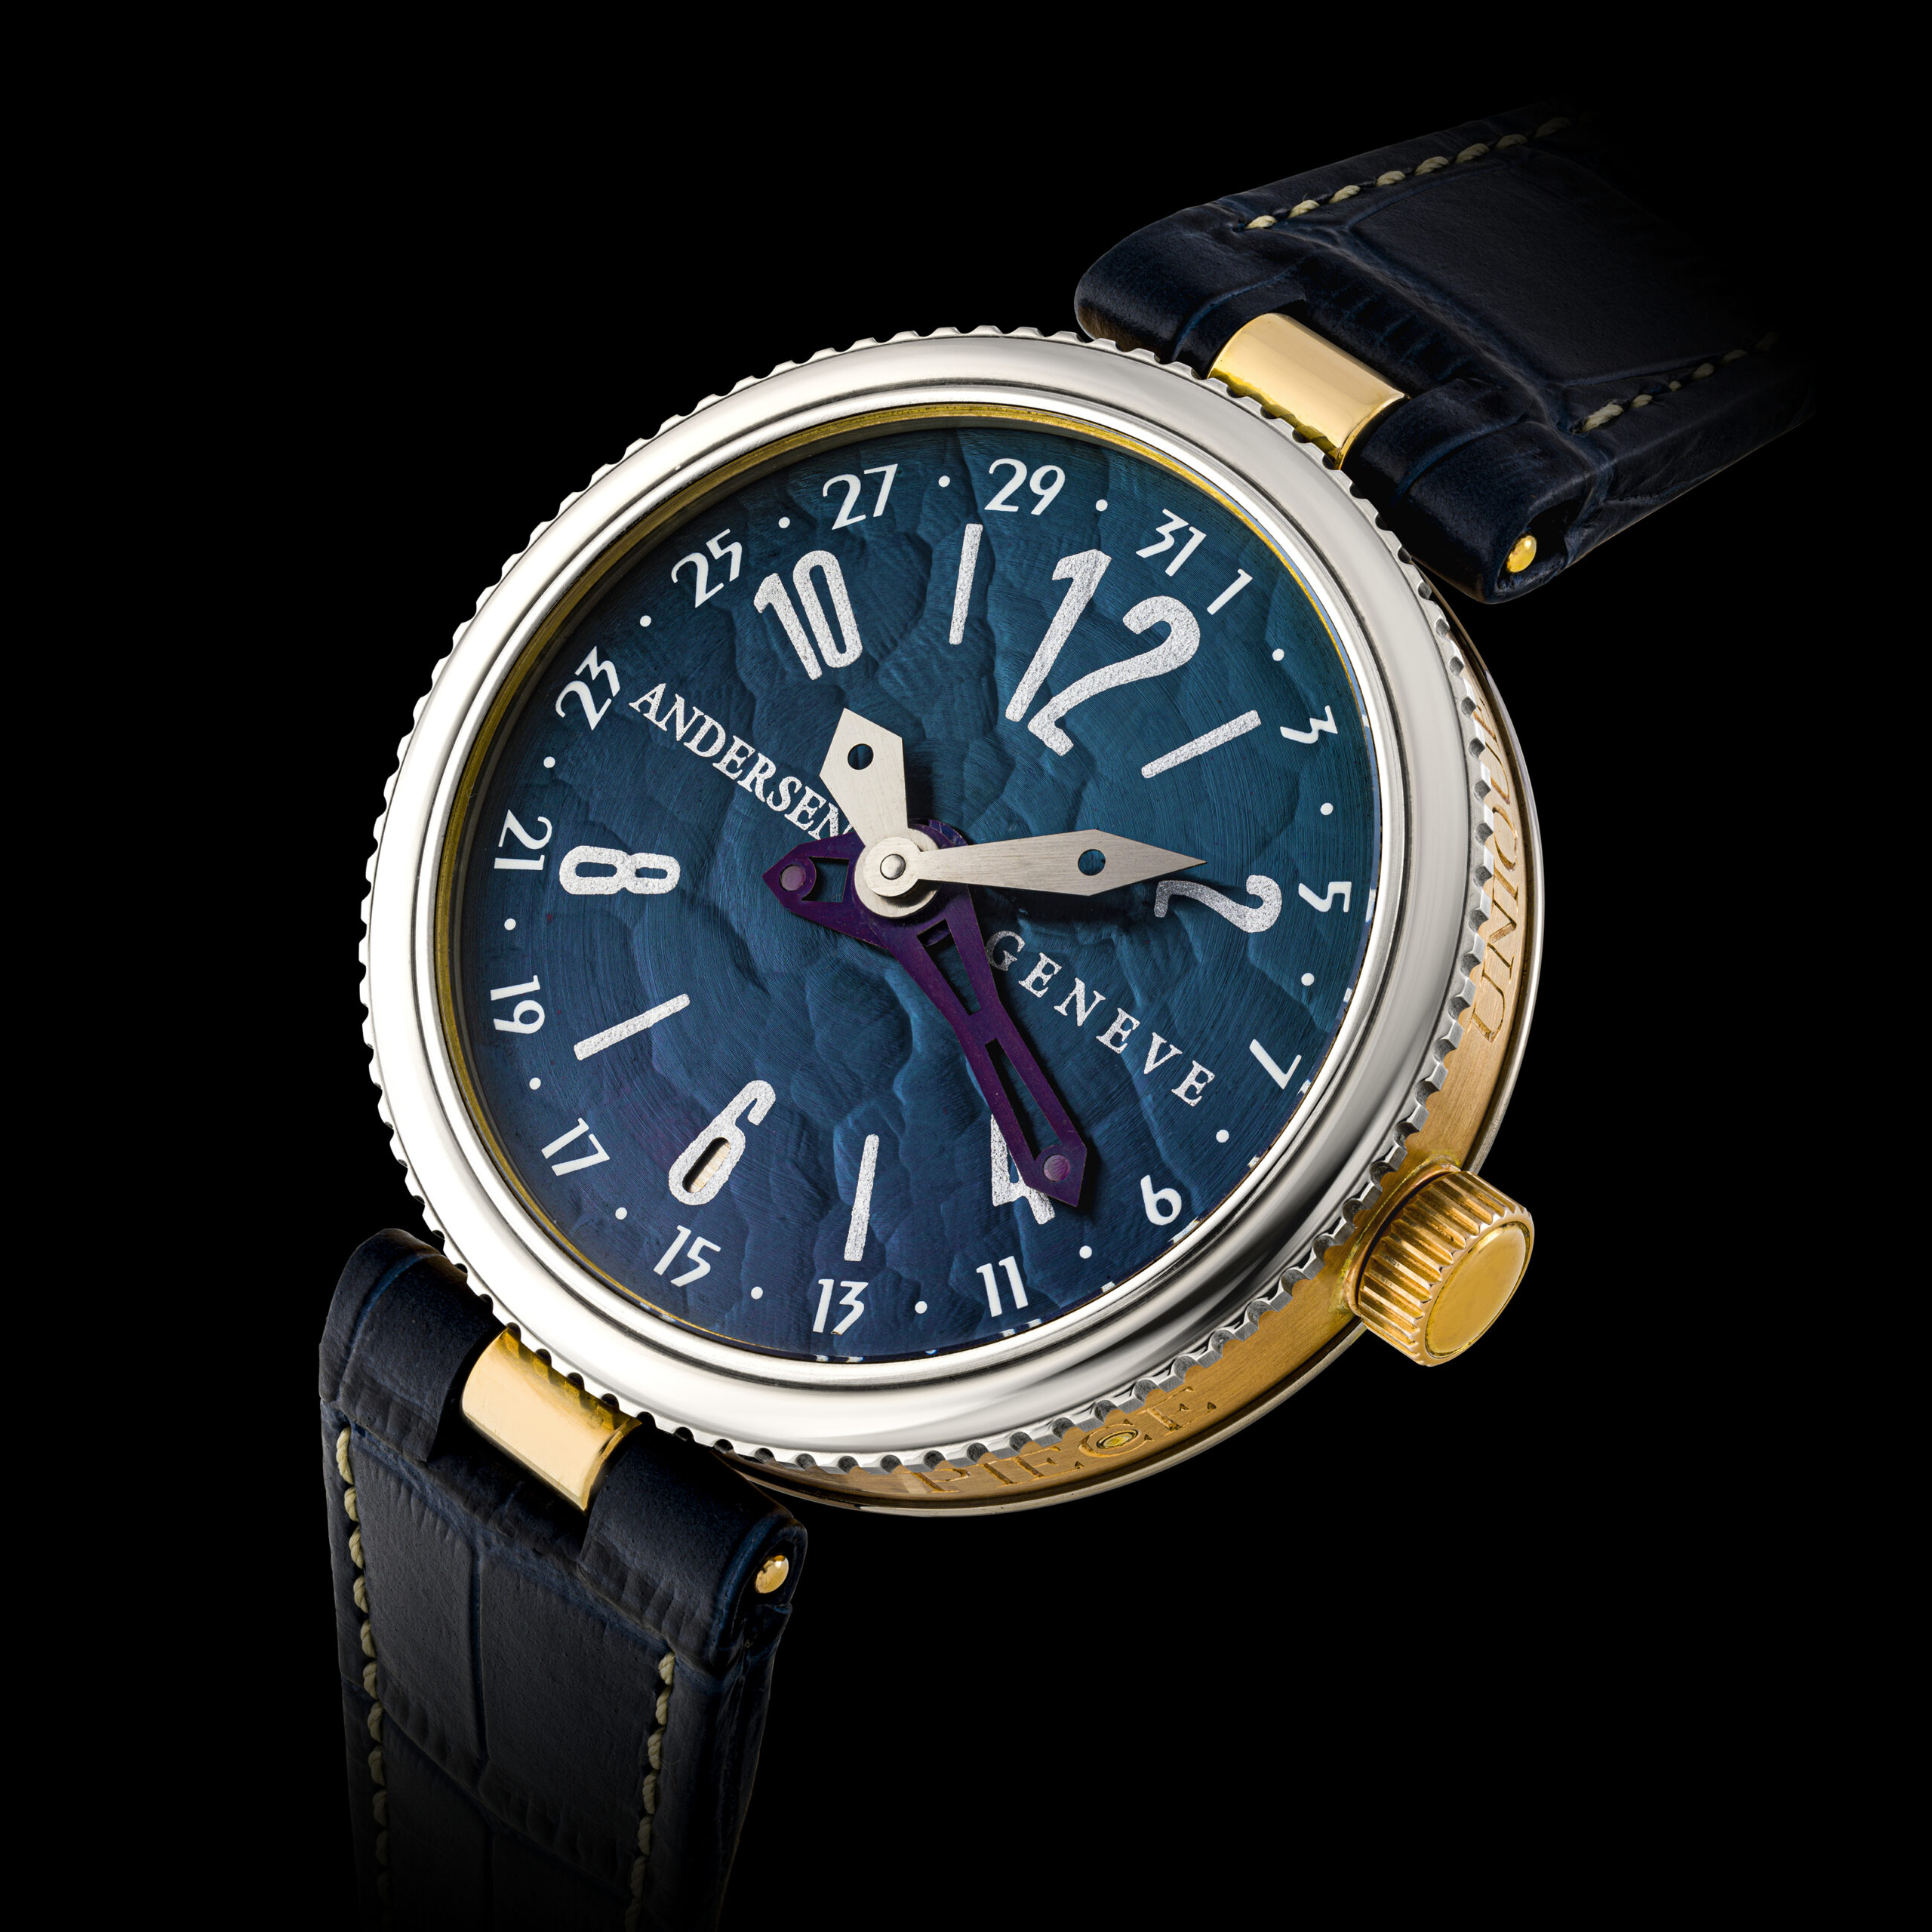 This Patek Philippe Sky Moon Tourbillon Is The Most Expensive